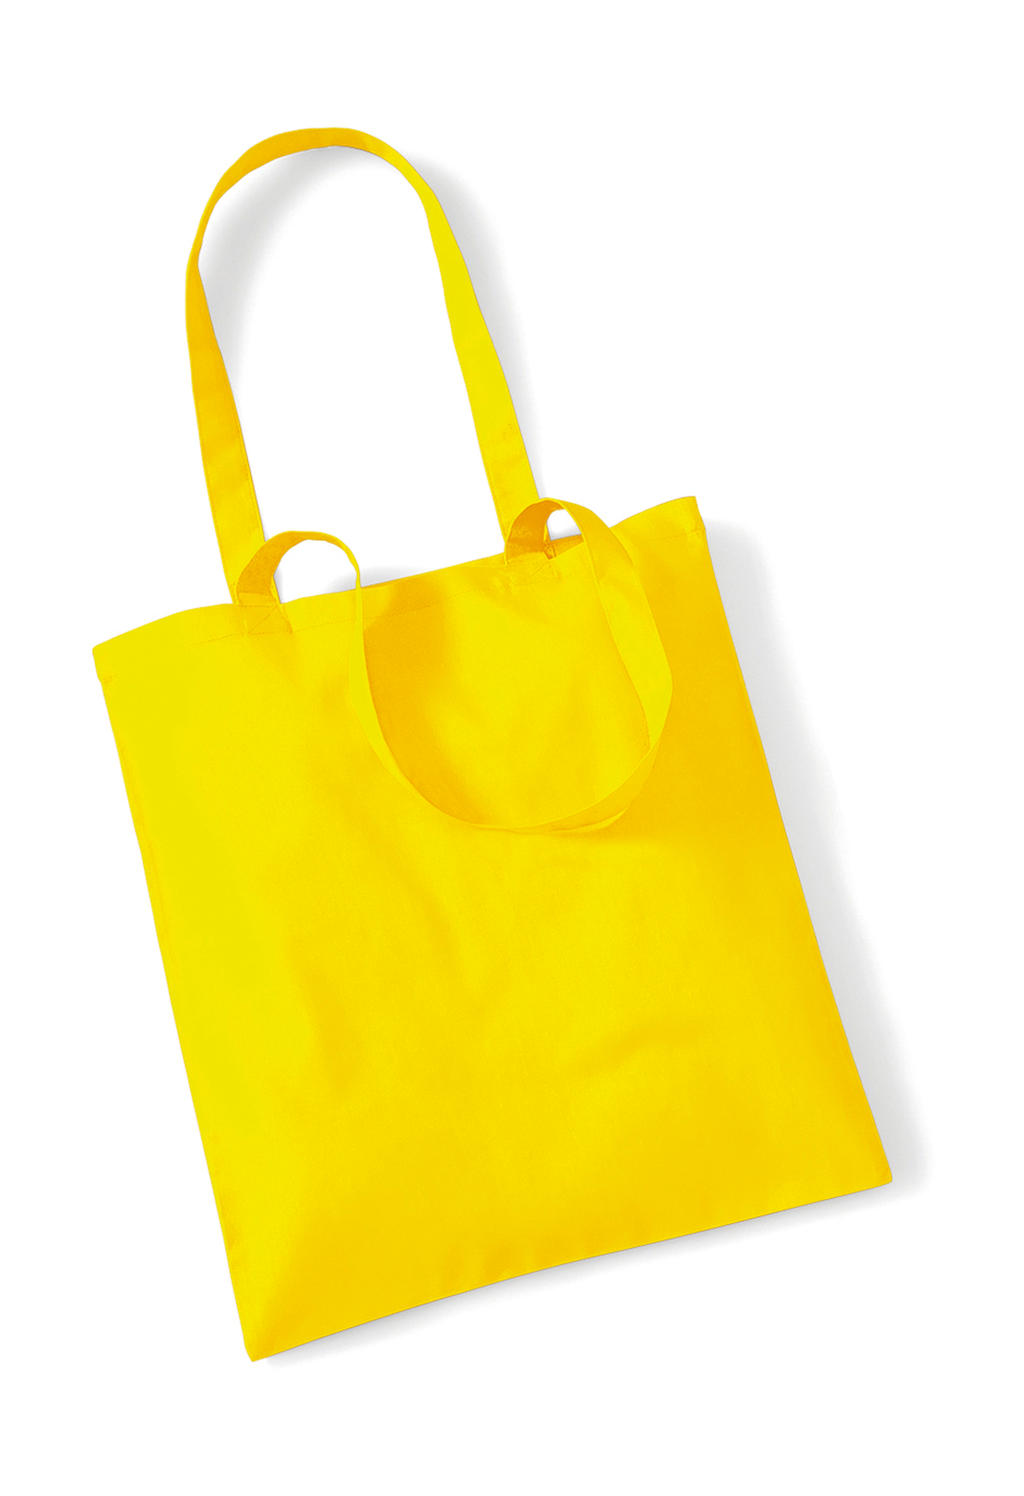  Bag for Life - Long Handles in Farbe Yellow